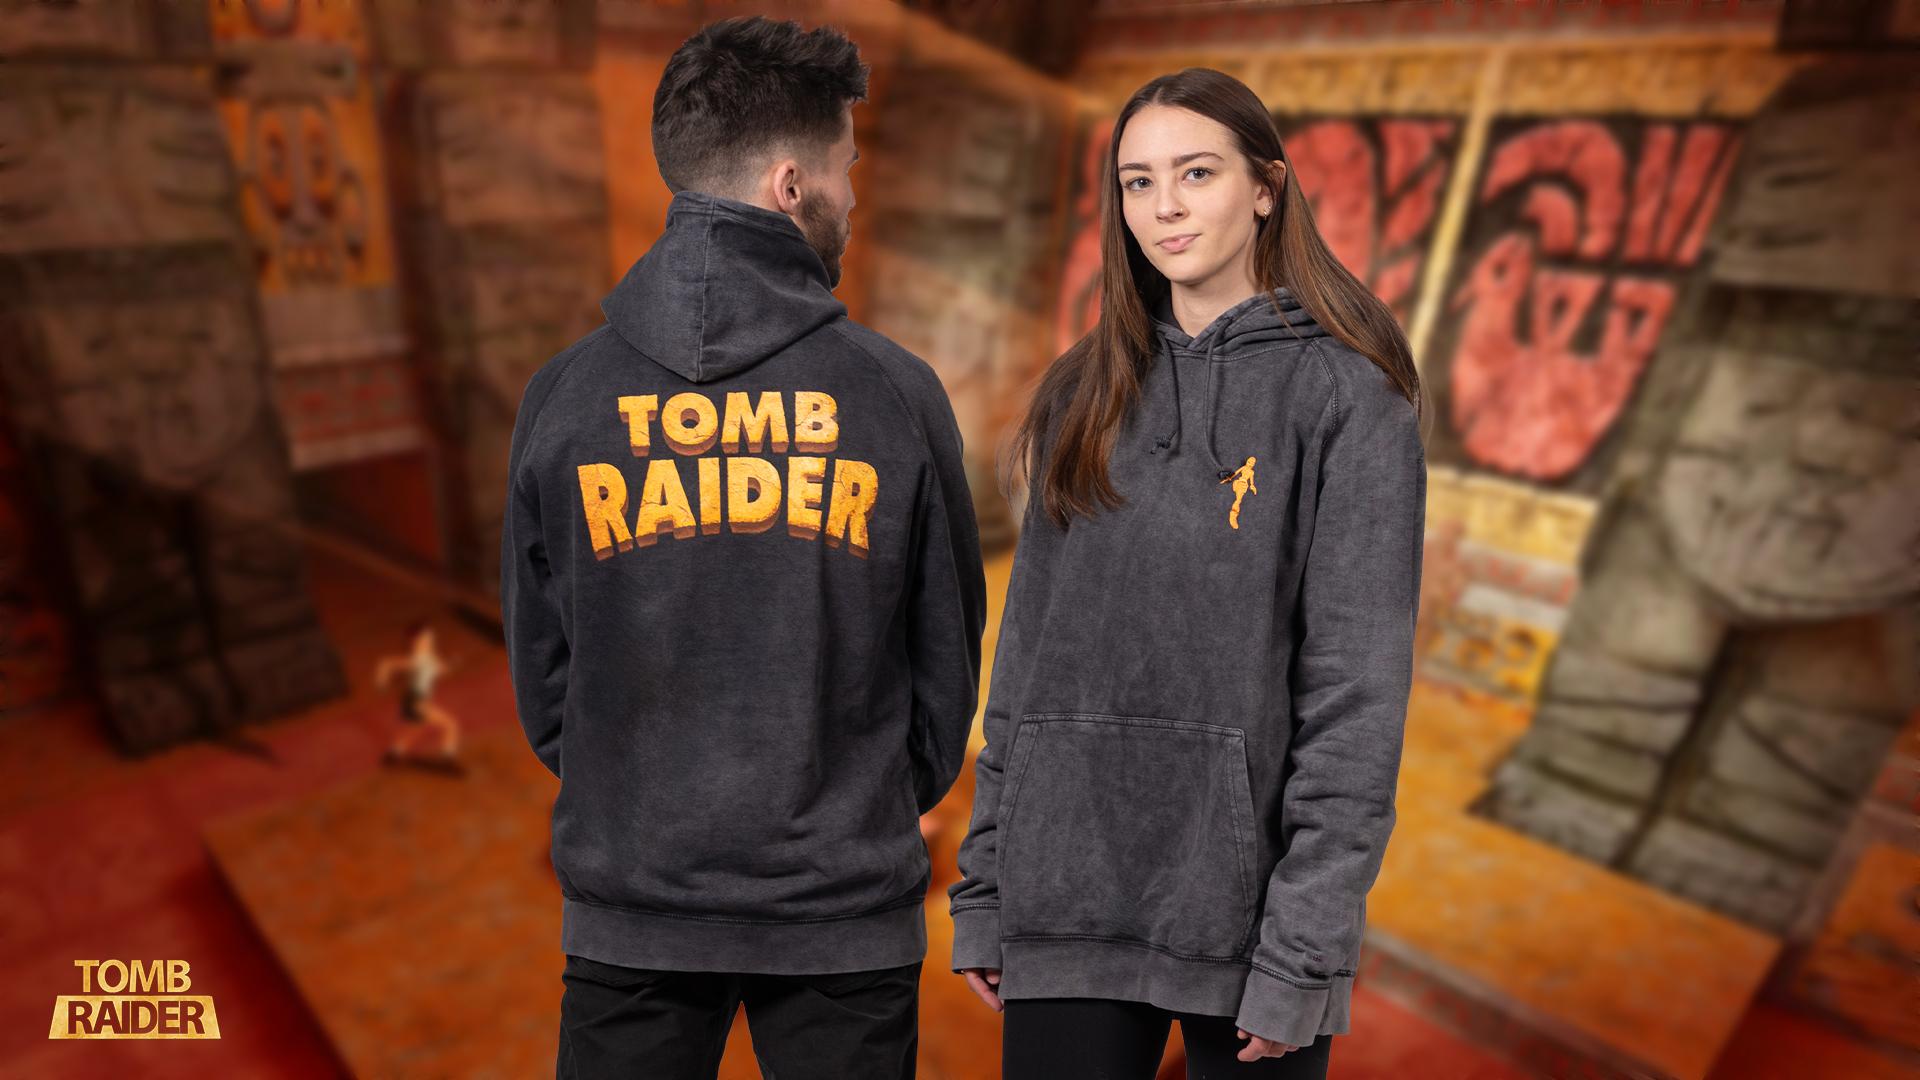 The Tomb Raider Play For Sport Hoodie, a black tie-dyed pullover feat. a silhouette of Lara Croft embroidered on the front, and the game’s logo printed on the back.